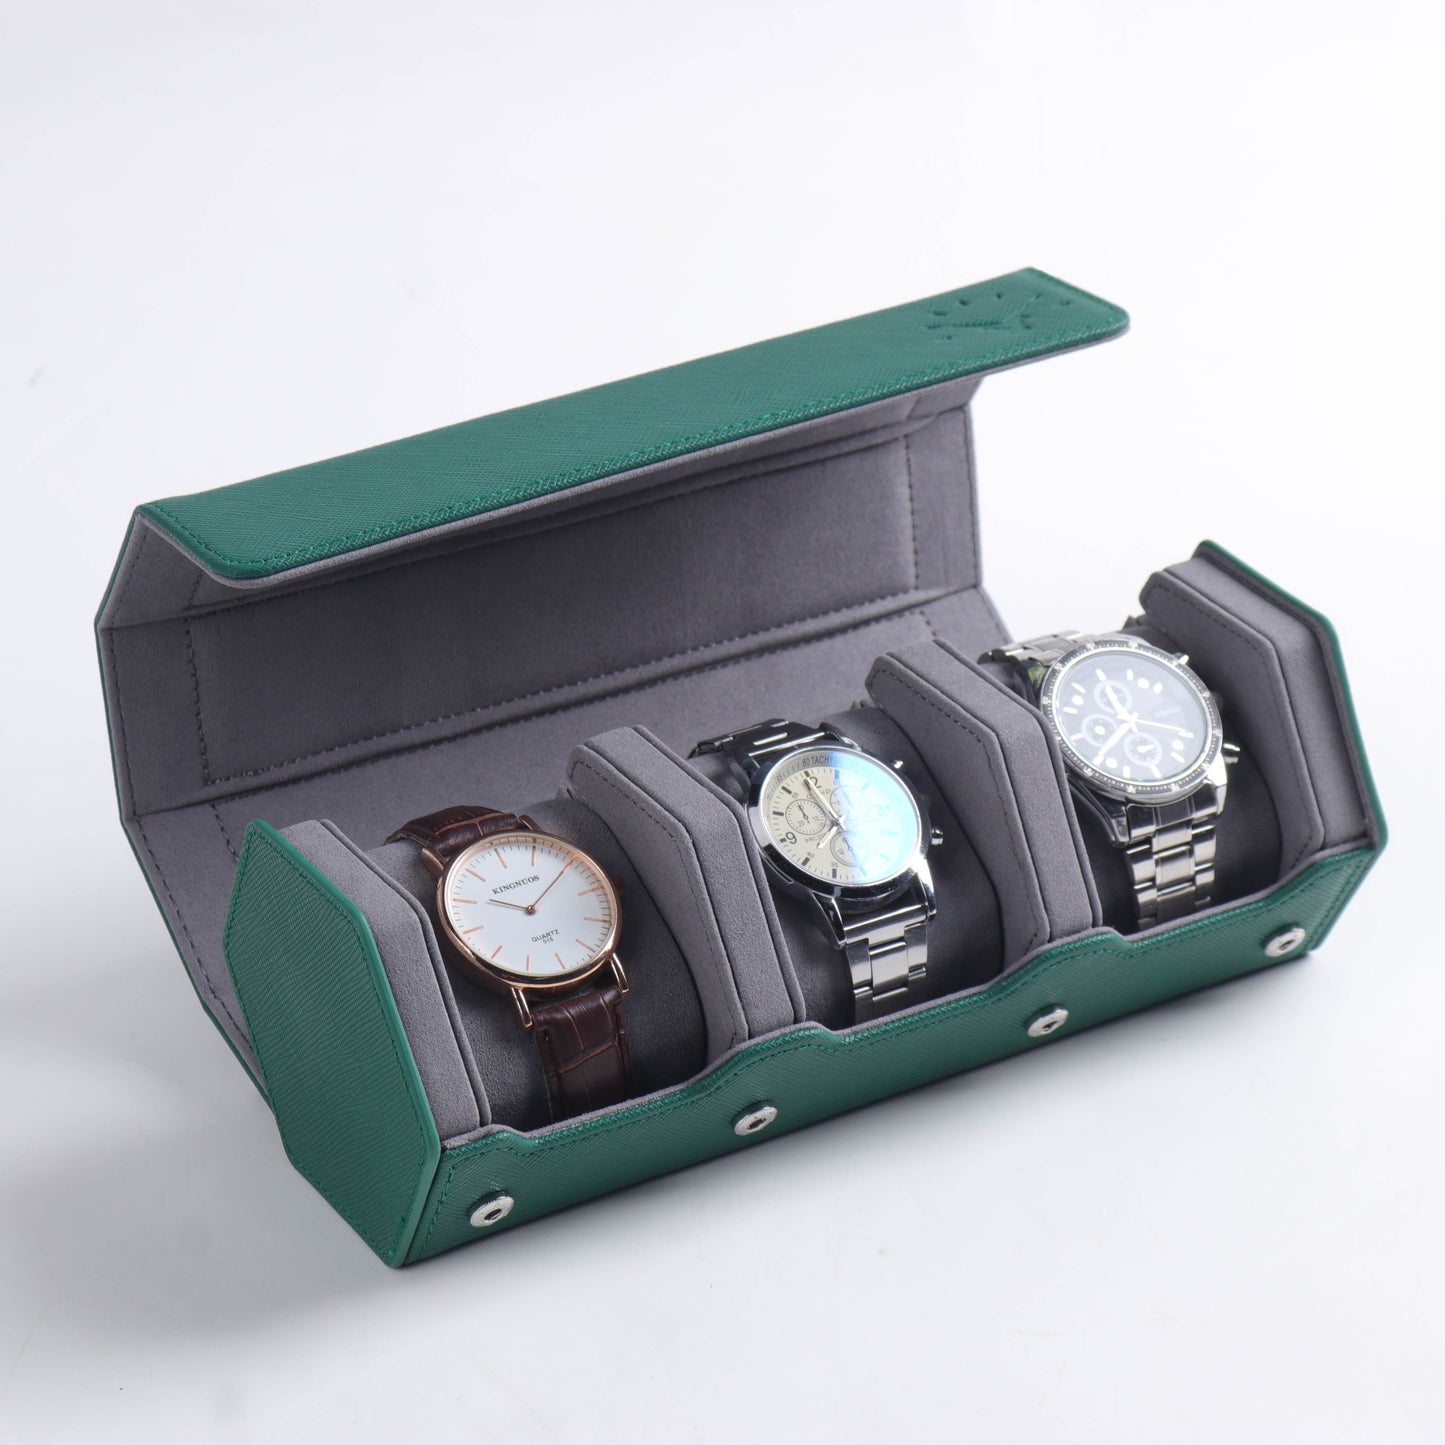 Green Saffiano Leather Traveling Watch Roll - 3 Watches